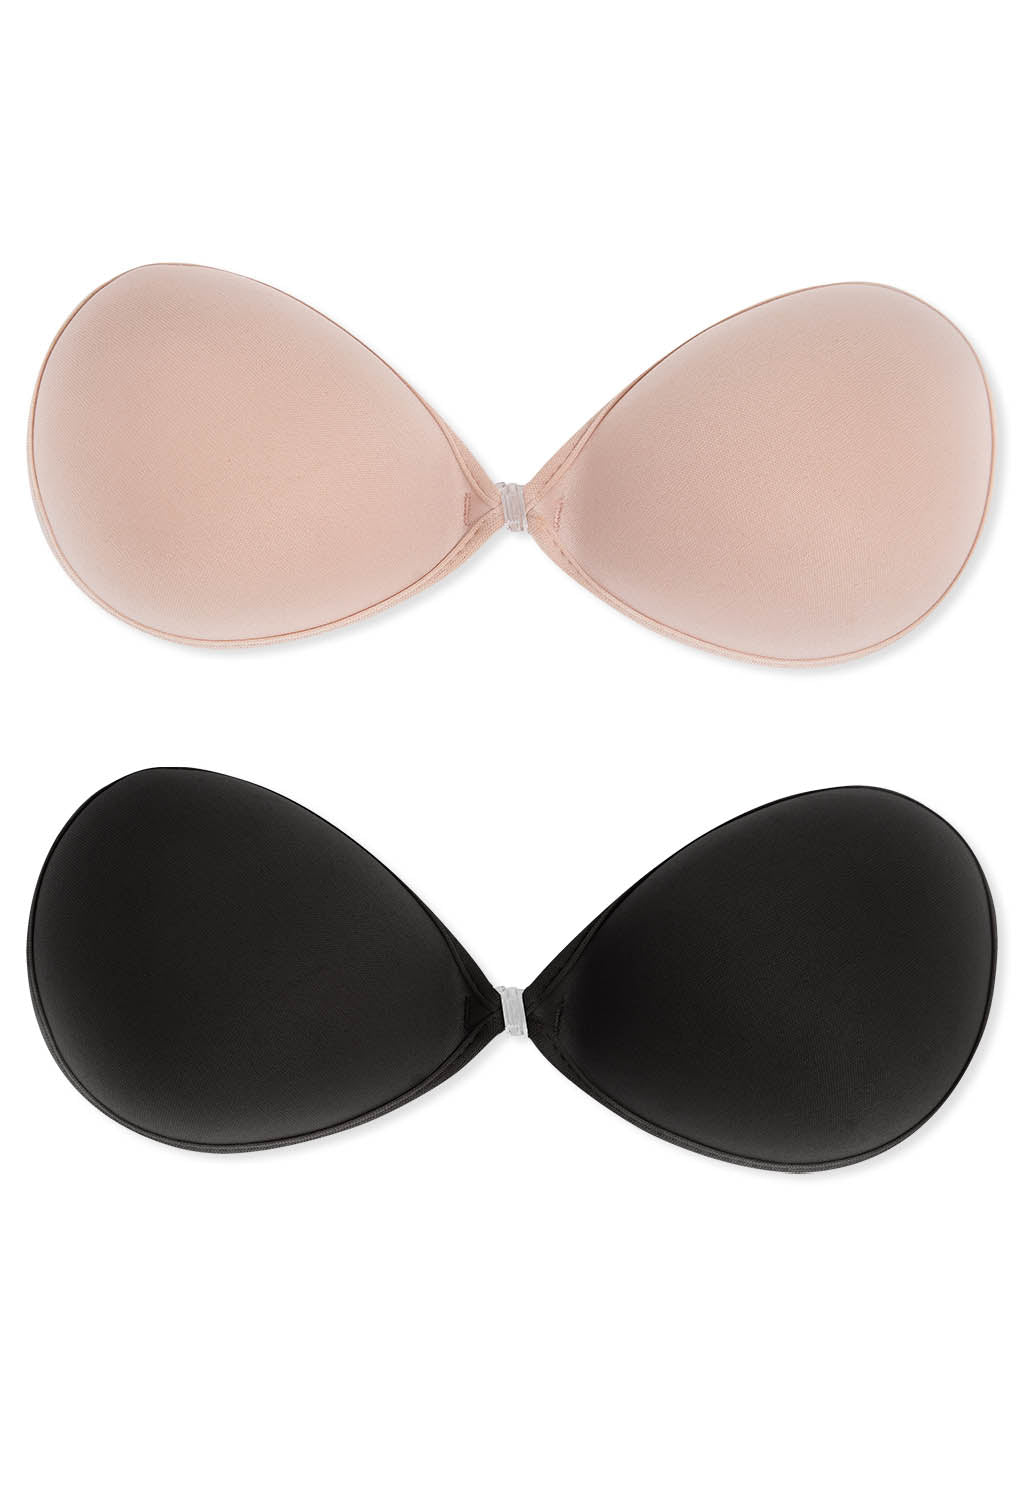 Bras Pack Bra Push Up Strapless Bra Adhesive Bra Backless Bra Lace Bra  Reusable Nipple Covers for Backless Clothing Swimsuit Bridal Dress Evening